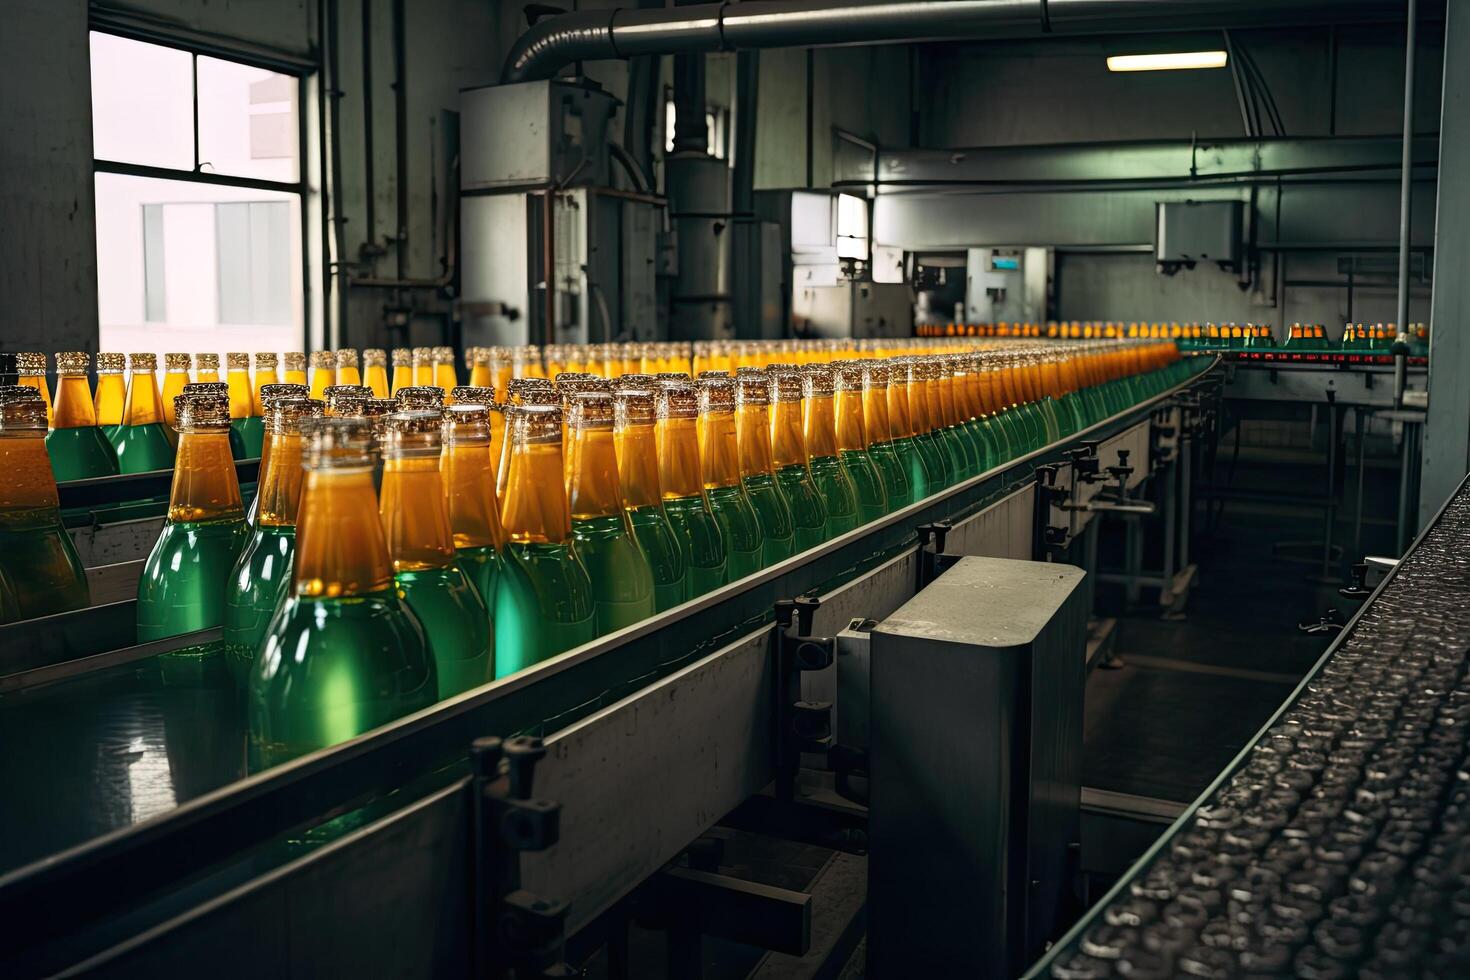 Bottling line of orange juice in bottles on a conveyor belt, A beverage plant factory interior view with a conveyor system, photo